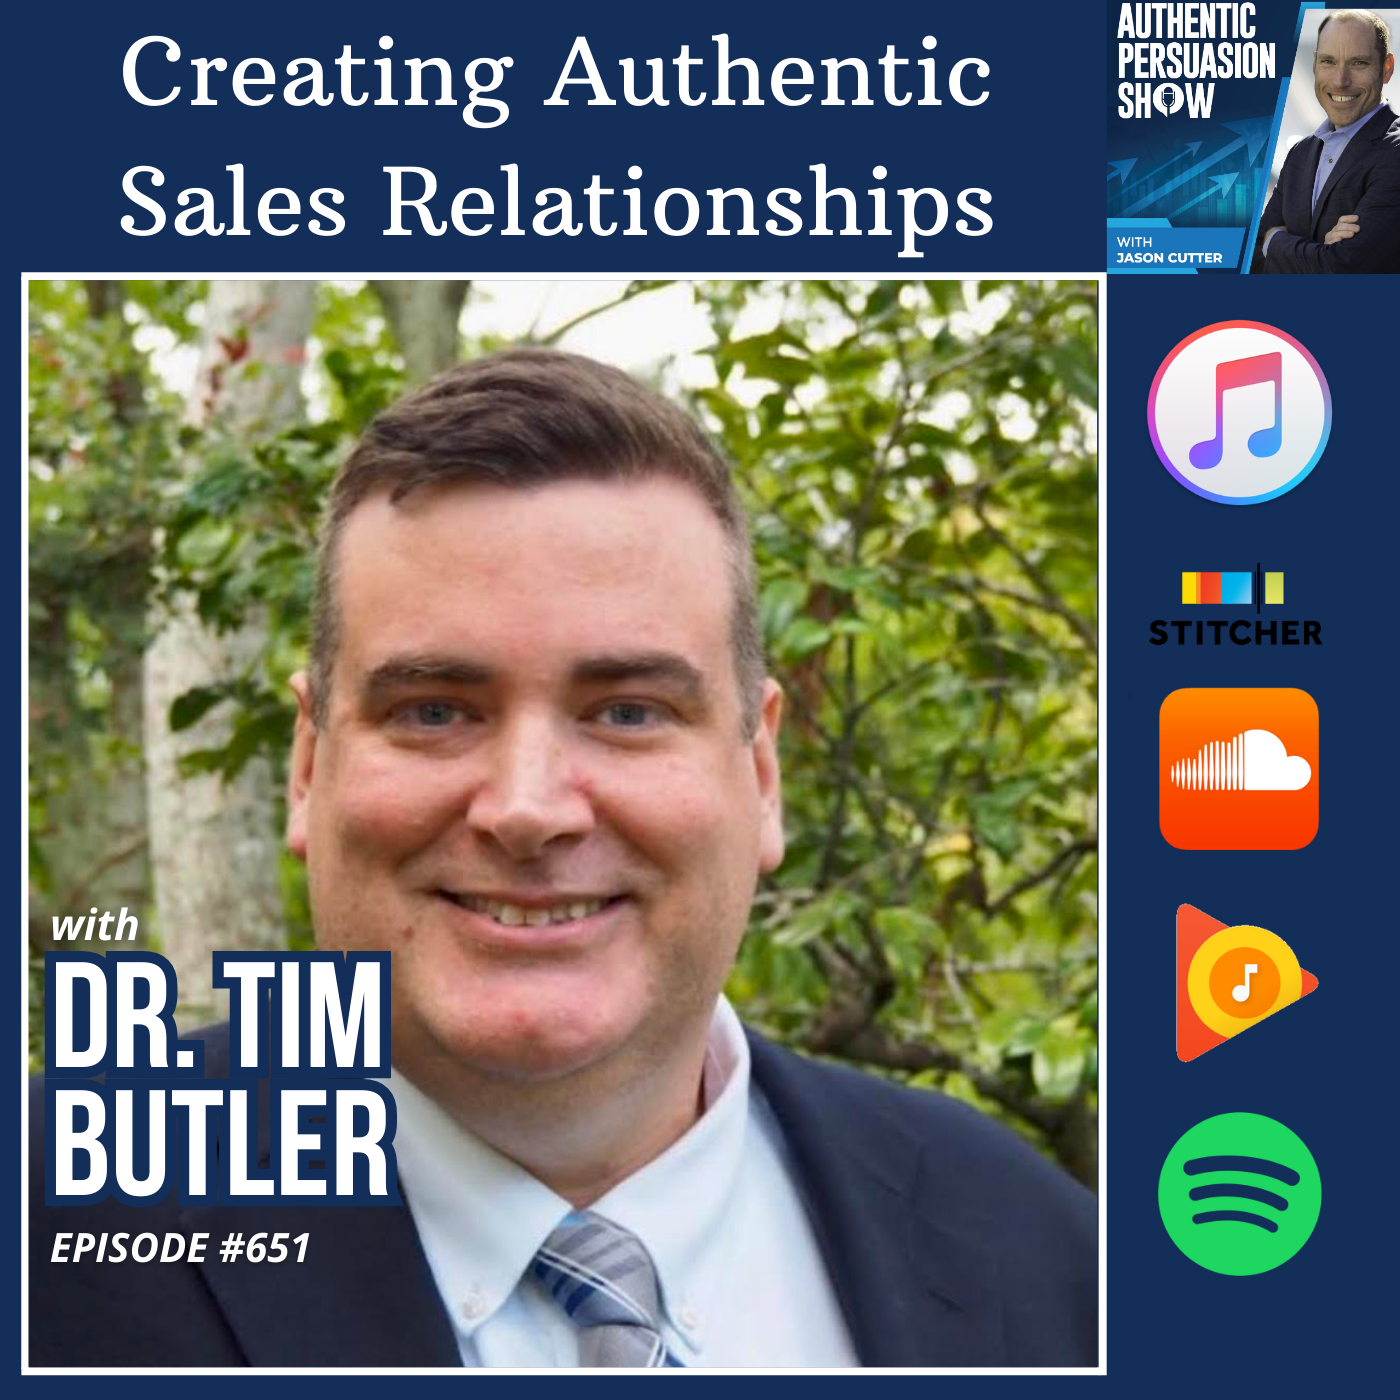 [651] Creating Authentic Sales Relationships, with Dr. Tim Butler from Southeastern Louisiana University